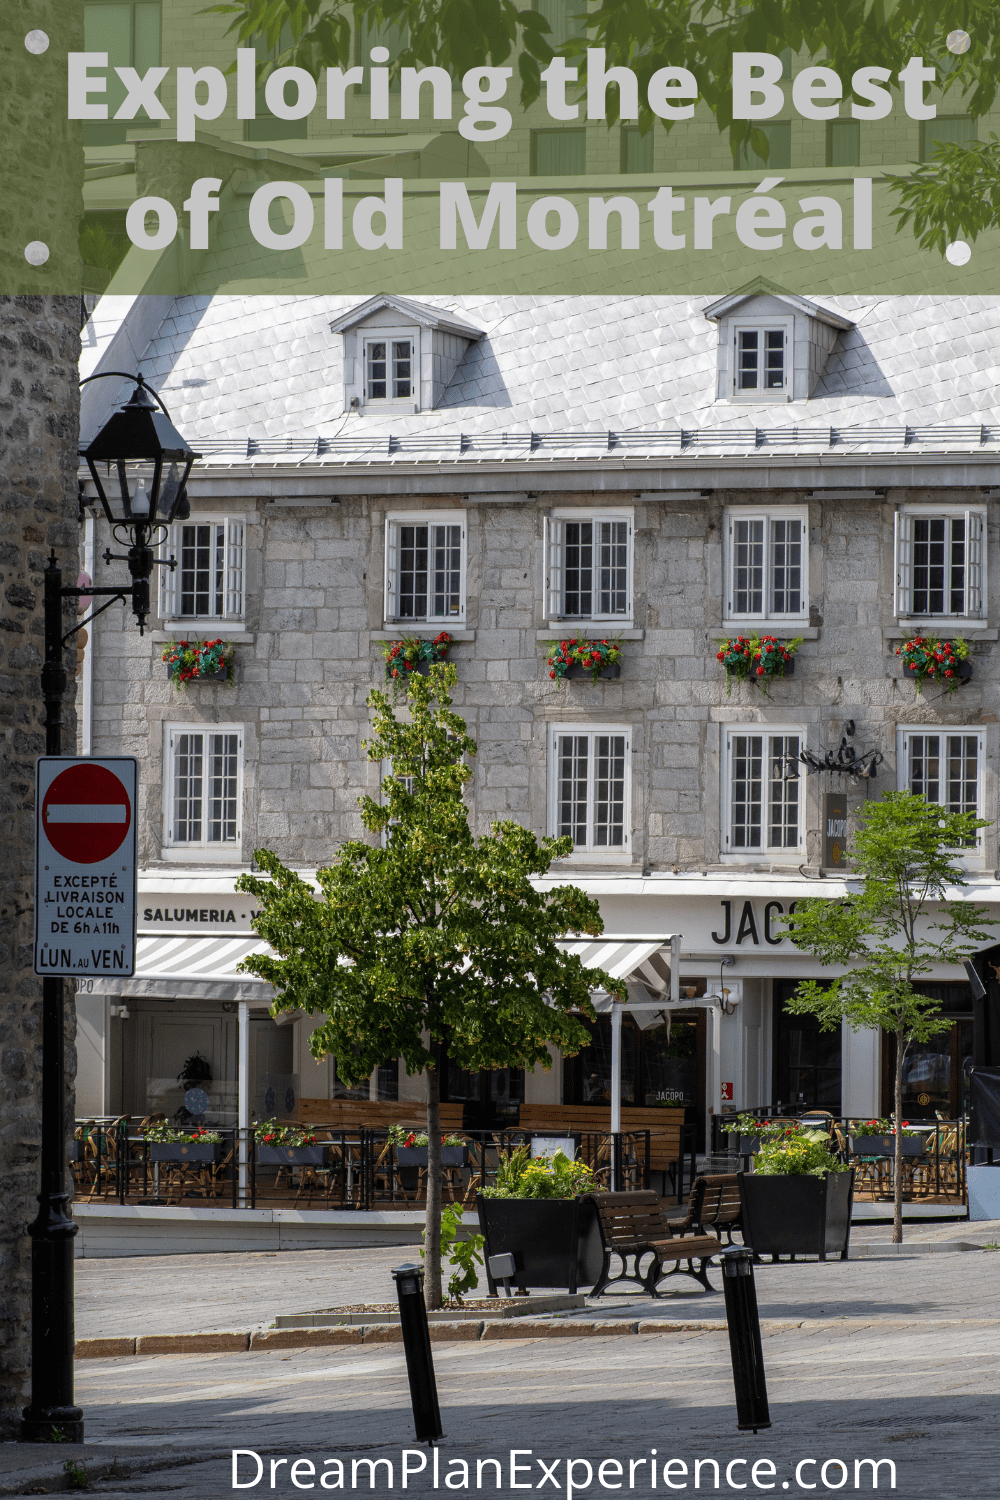 Take a walking tour of Old Montreal, Quebec and discover the best sites to see and things to do